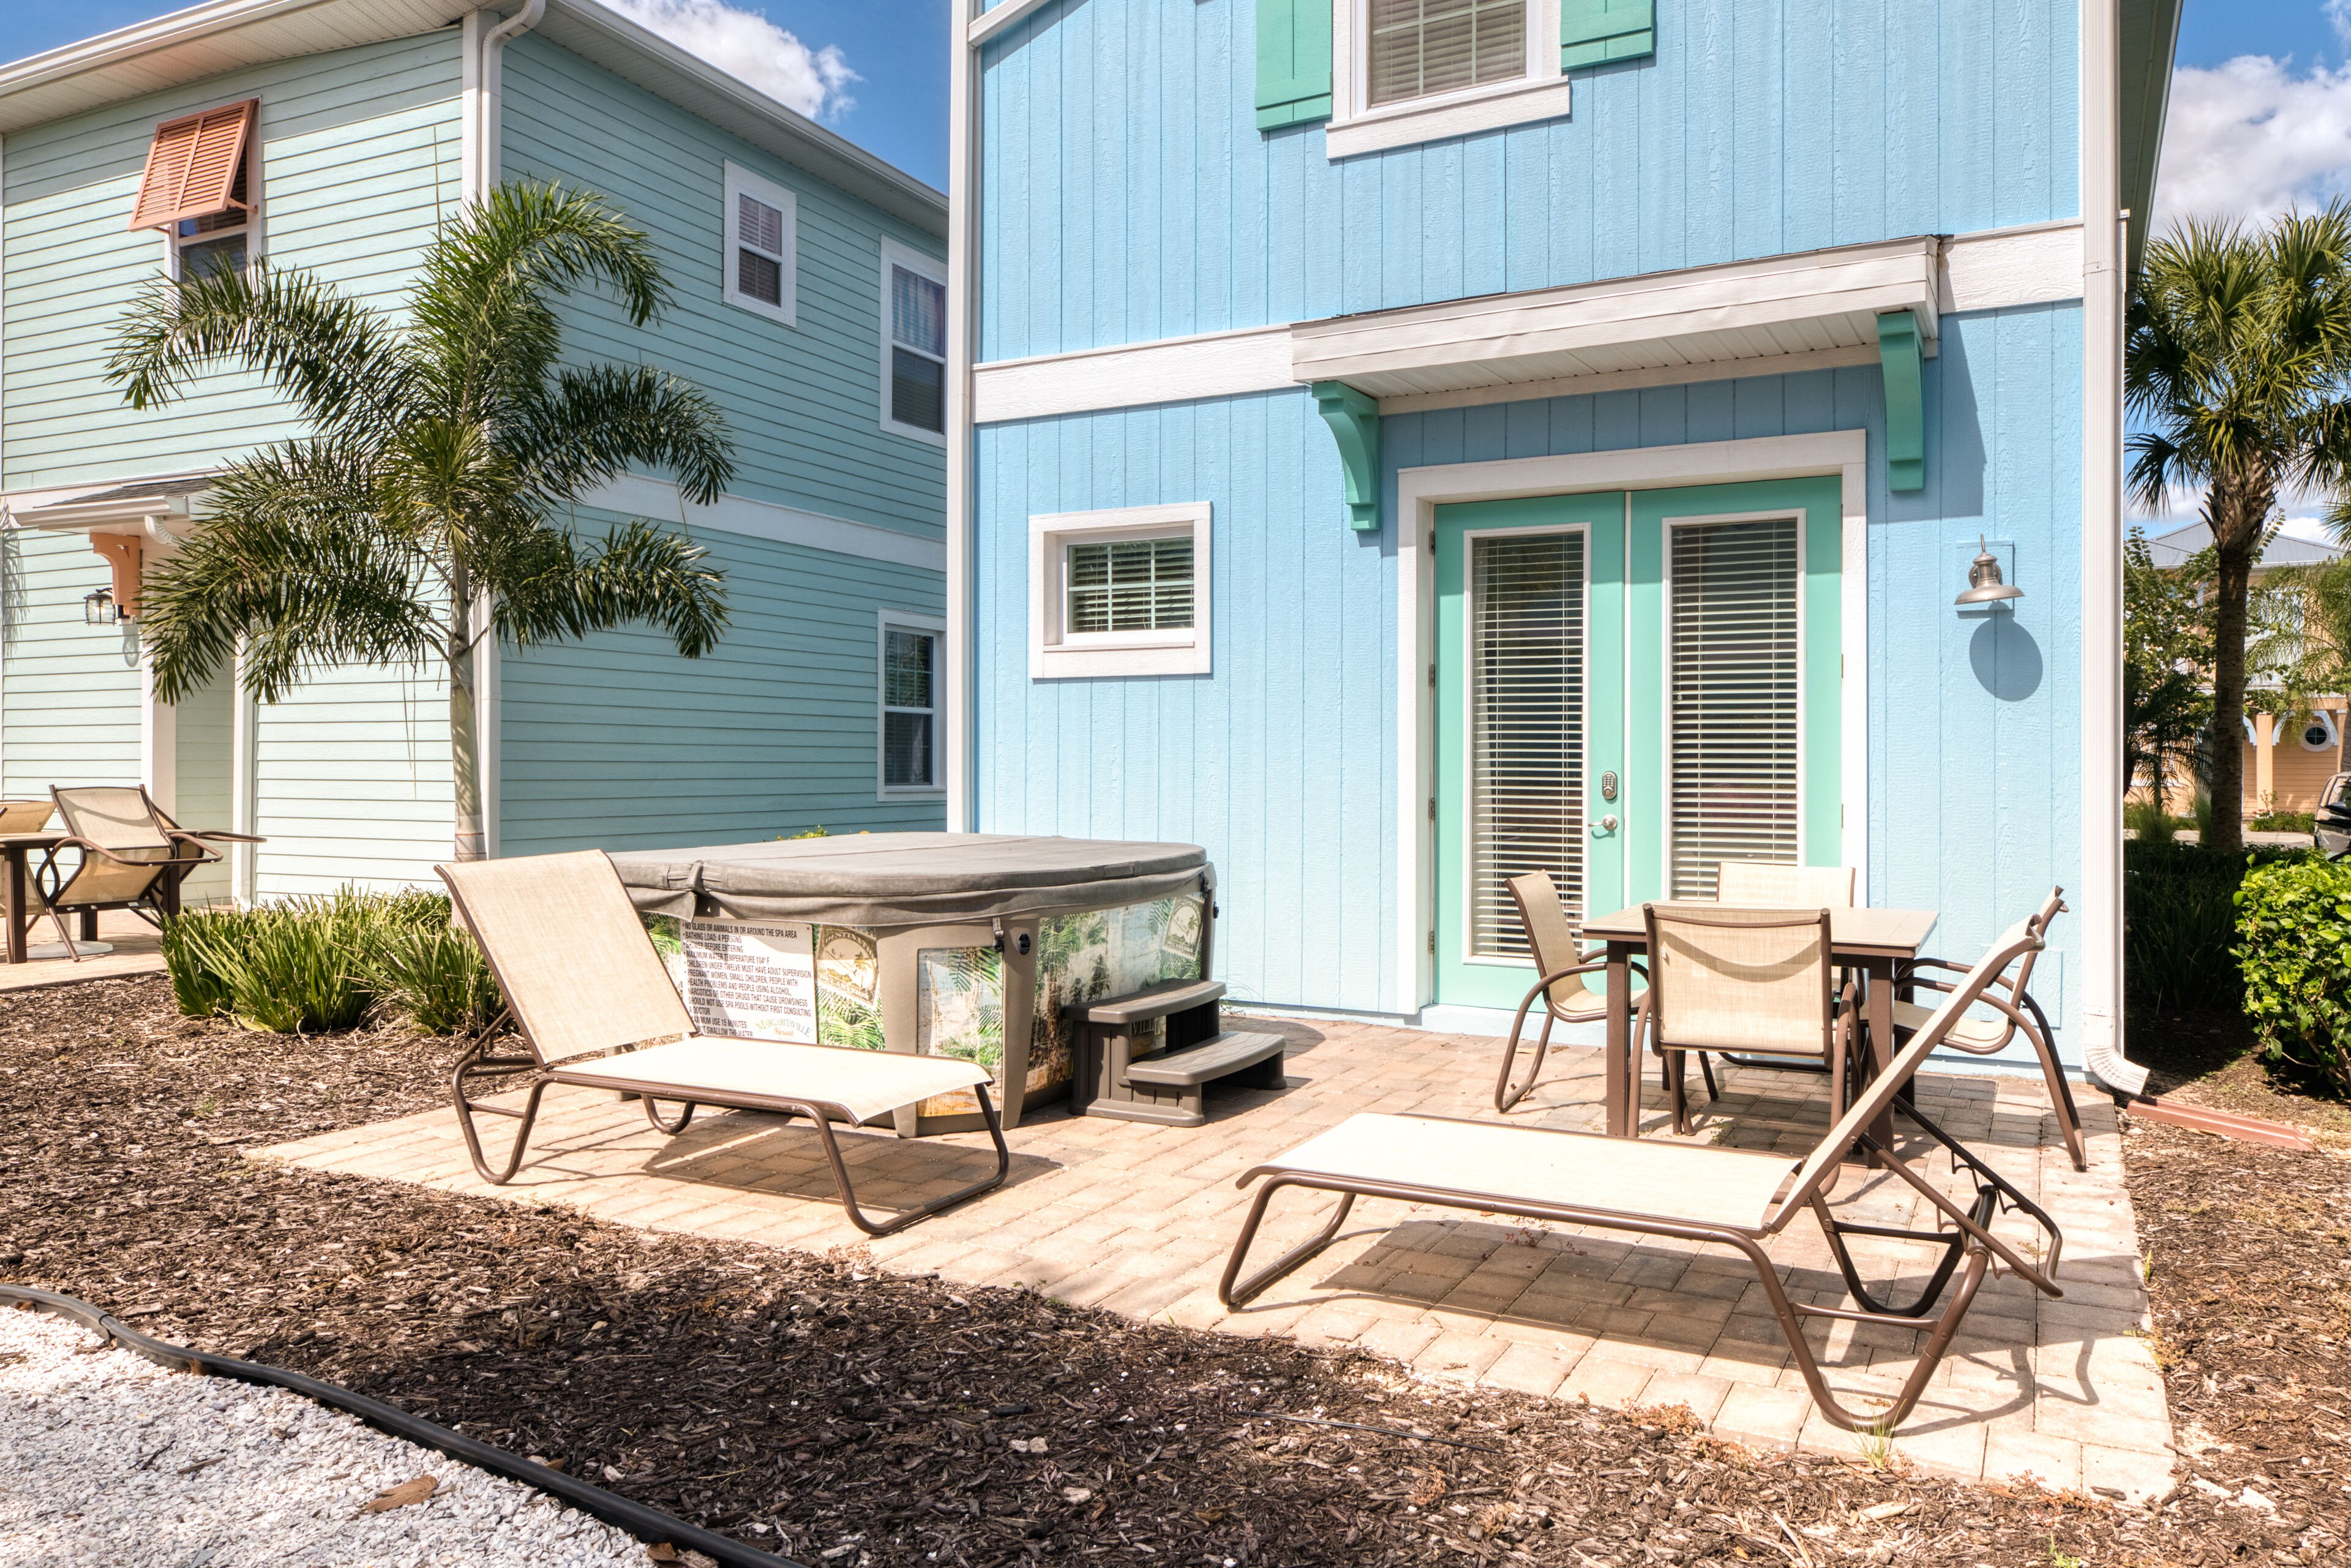 Property Image 1 - Vibrant Cottage with Hot Tub near Disney with Margaritaville Resort Access - 8032DR